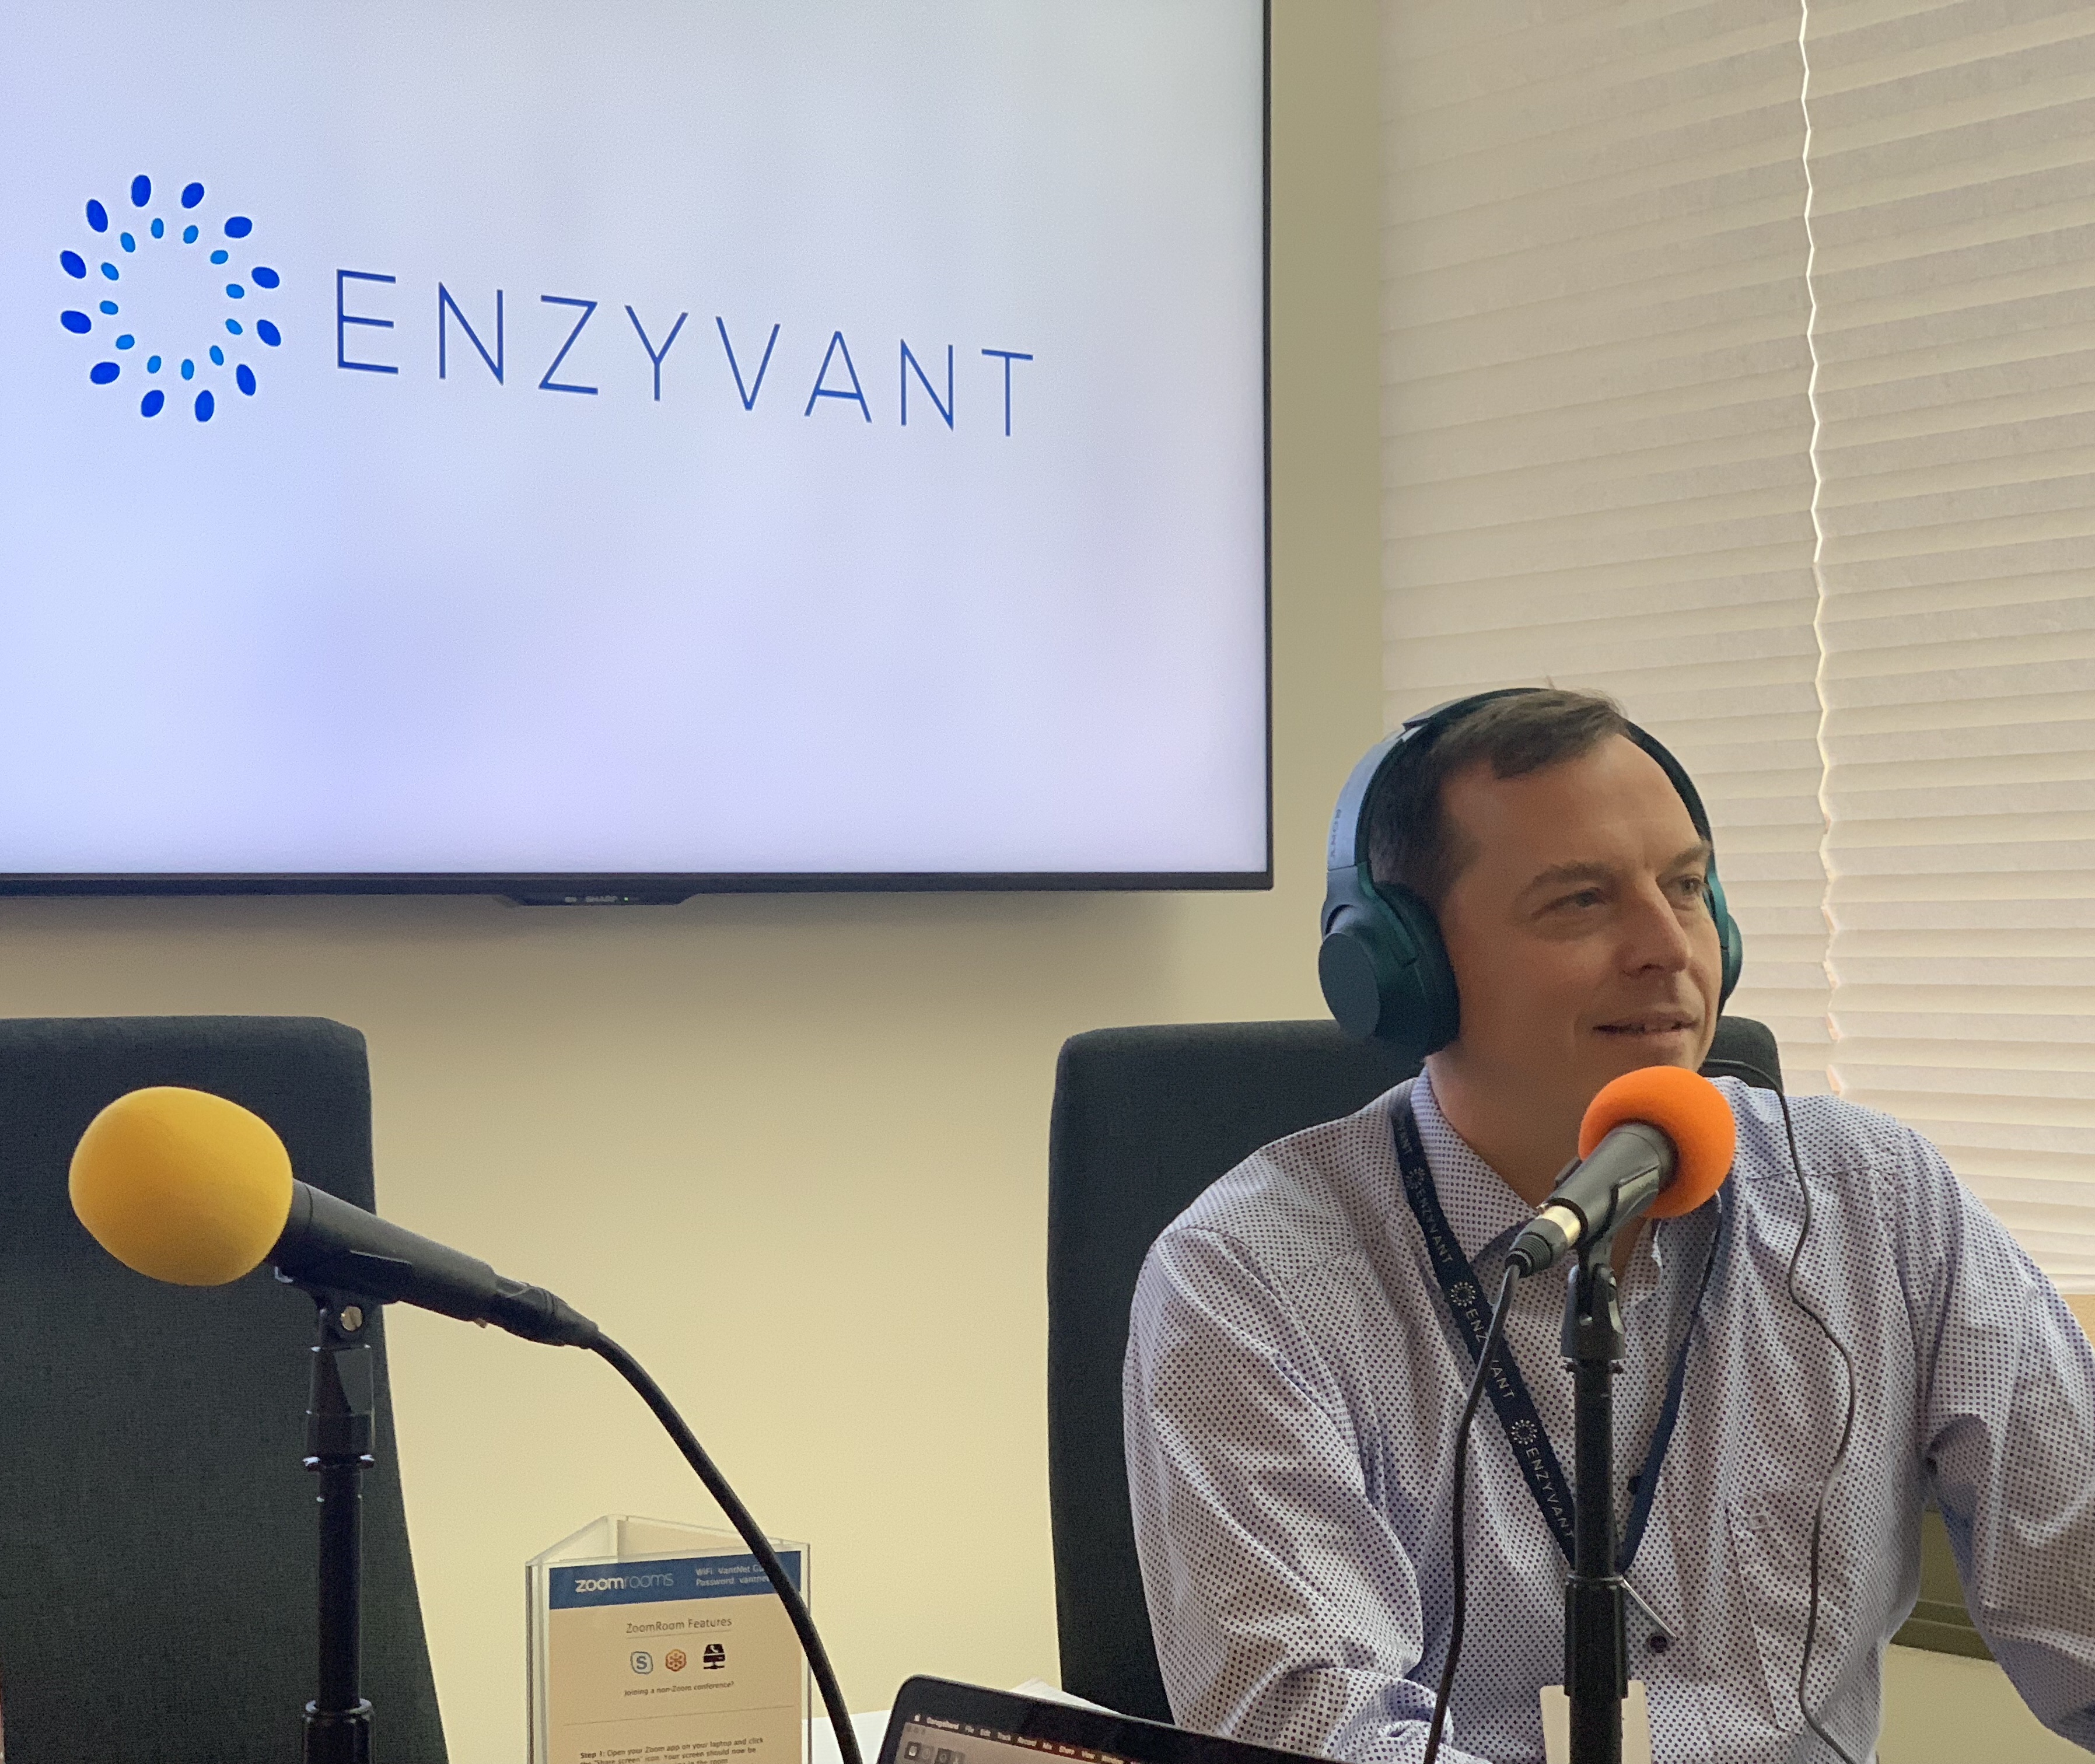 Researching a new therapy for an ultra-rare disease: A look into the science of Enzyvant with Dr. Alex Solyom, senior medical director